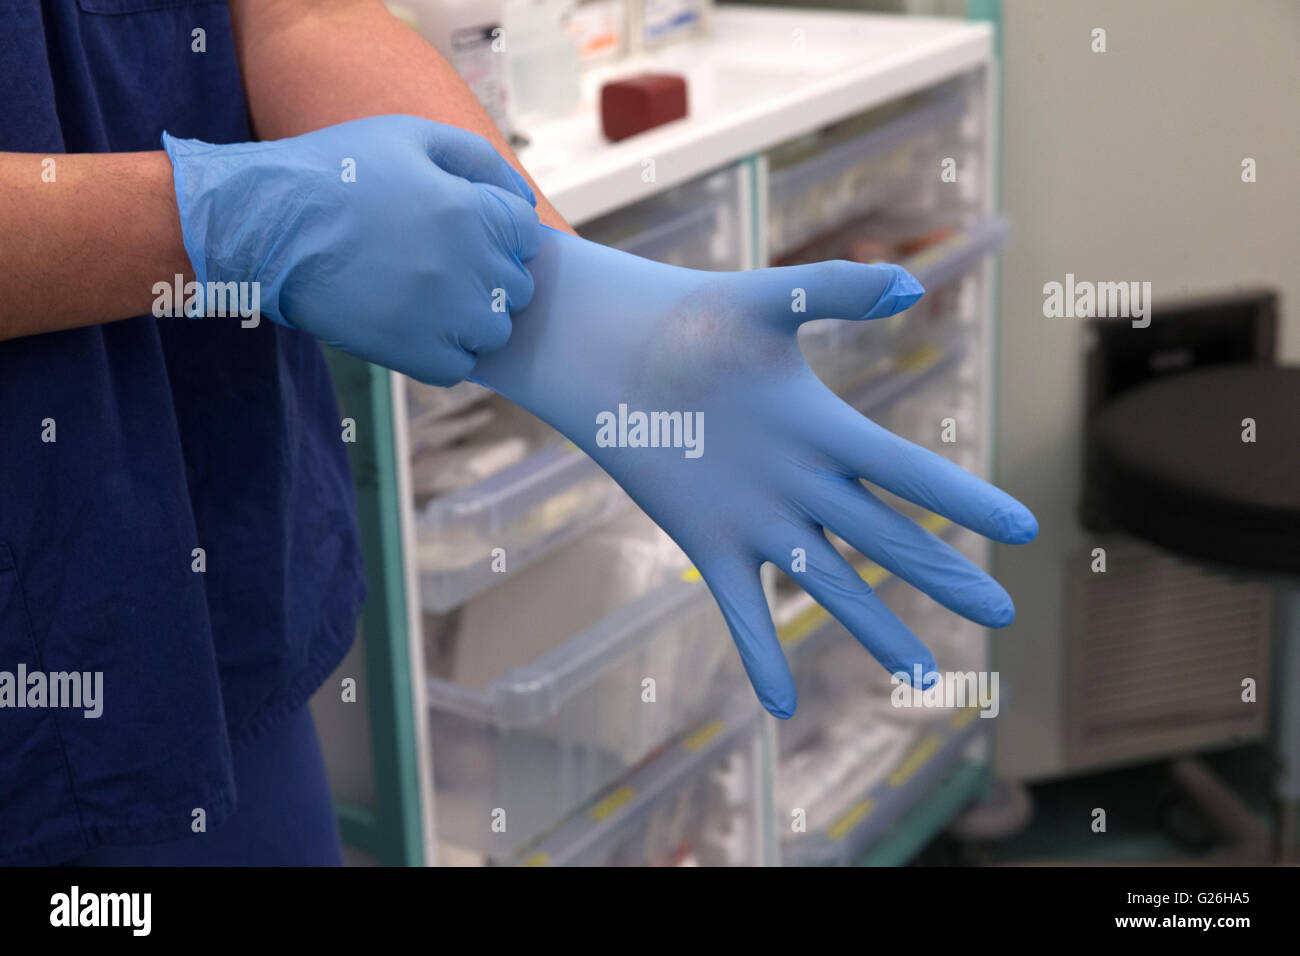 A theatre technician puts on sterile blue gloves in preparation for an operation Stock Photo